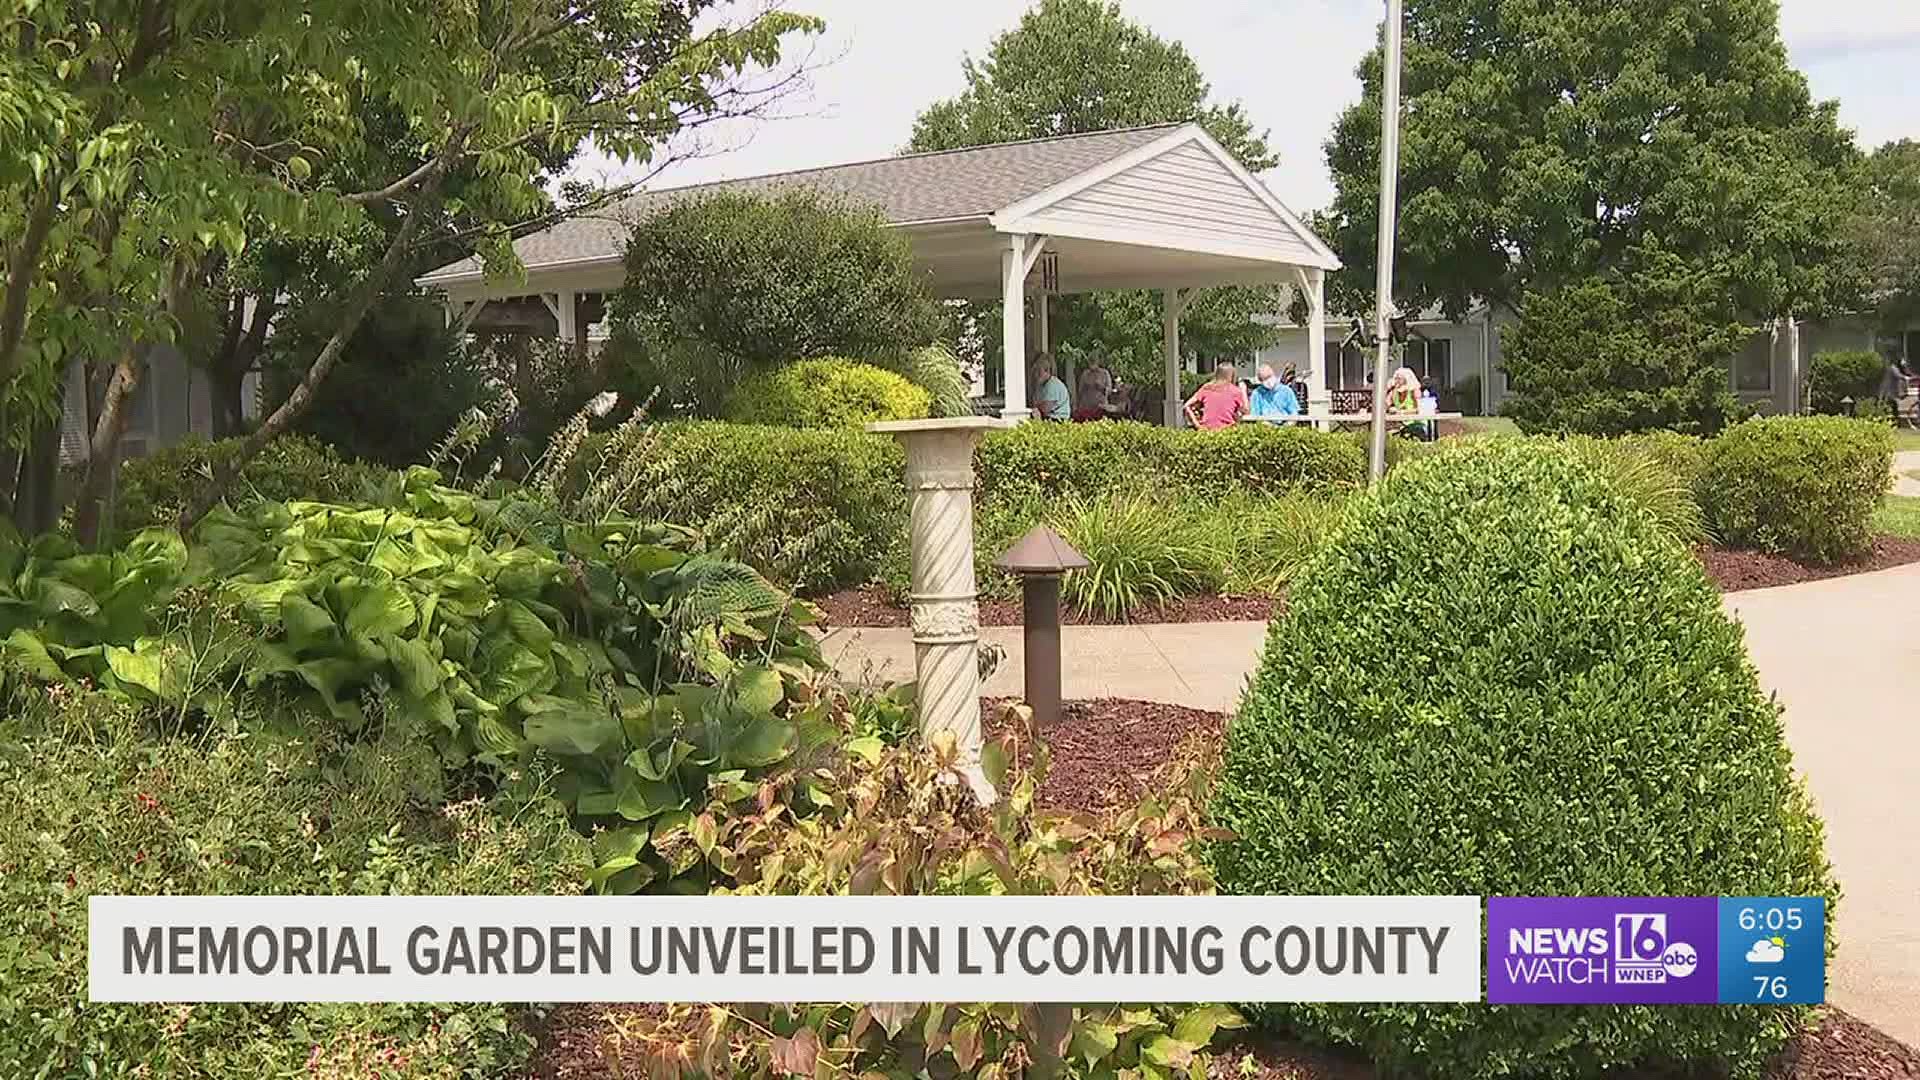 A nursing facility in Lycoming County is remembering all of its residents who passed away last year from COVID-19 and other complications.